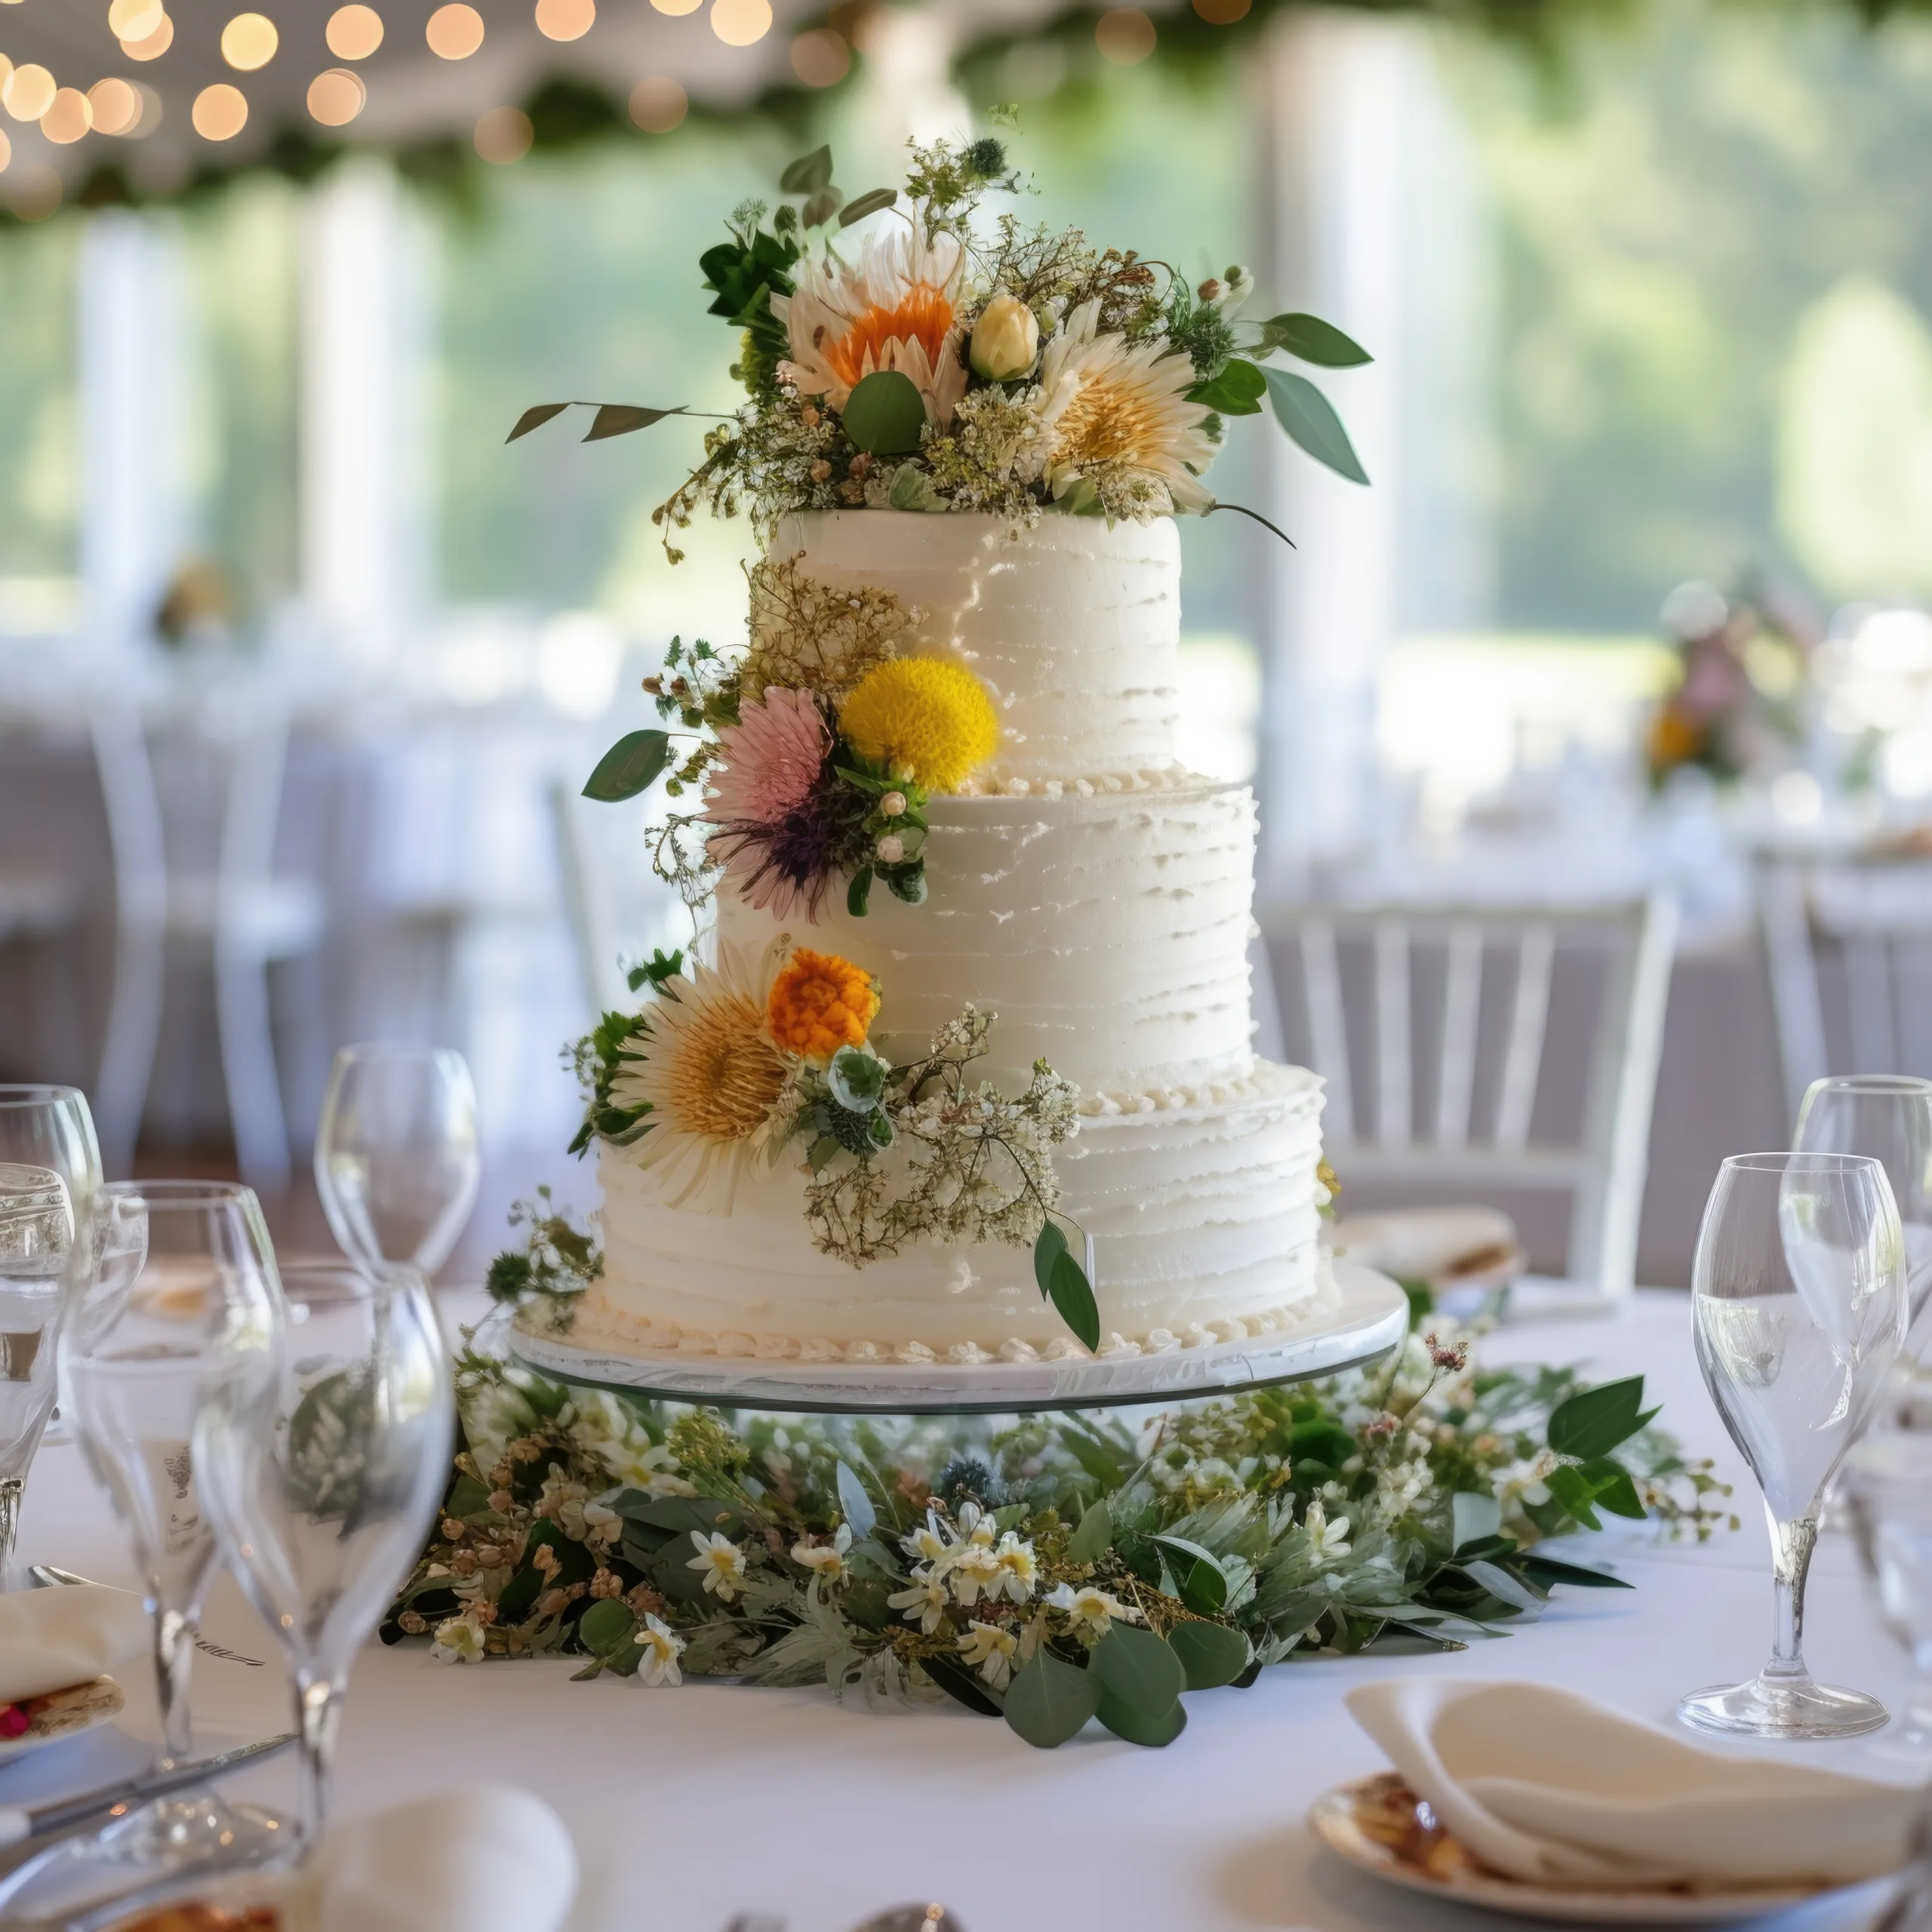 Italian Weddings: a wedding cake with flowers and greenery on a table.